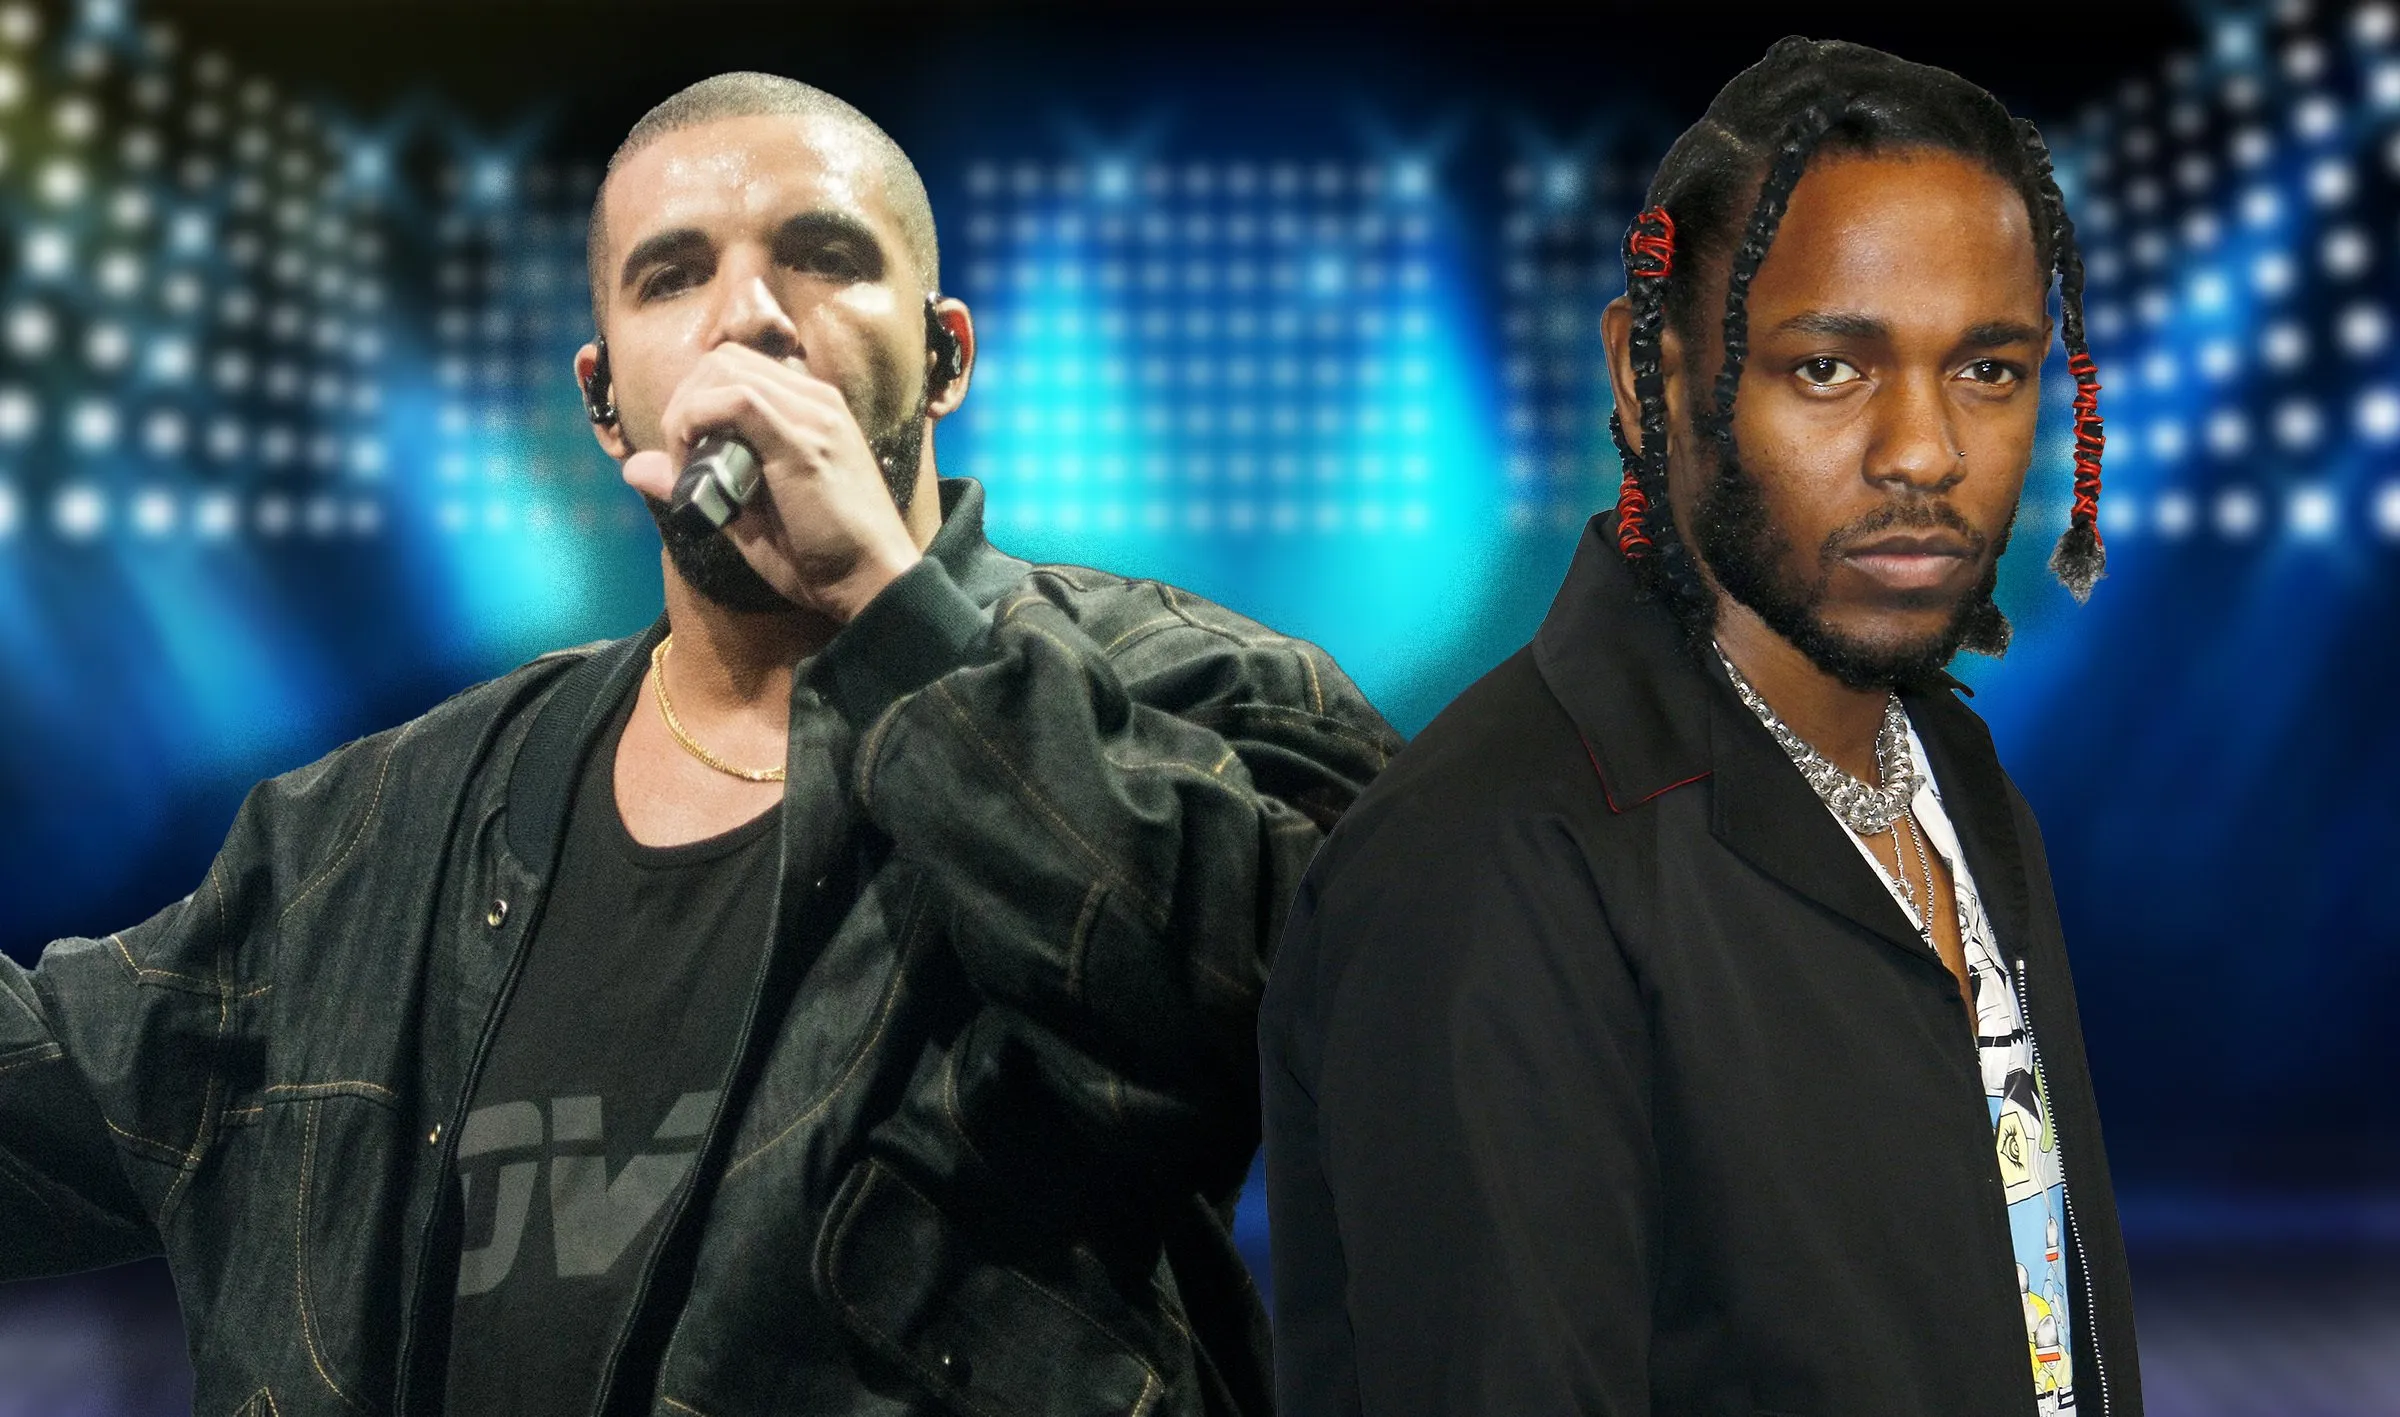 Pop icon Drake (left) and rap star Kendrick Lamar (right) are engaged in an epic feud. Images: Jacob Giampa/Tinseltown/Moxumbic/Shutterstock